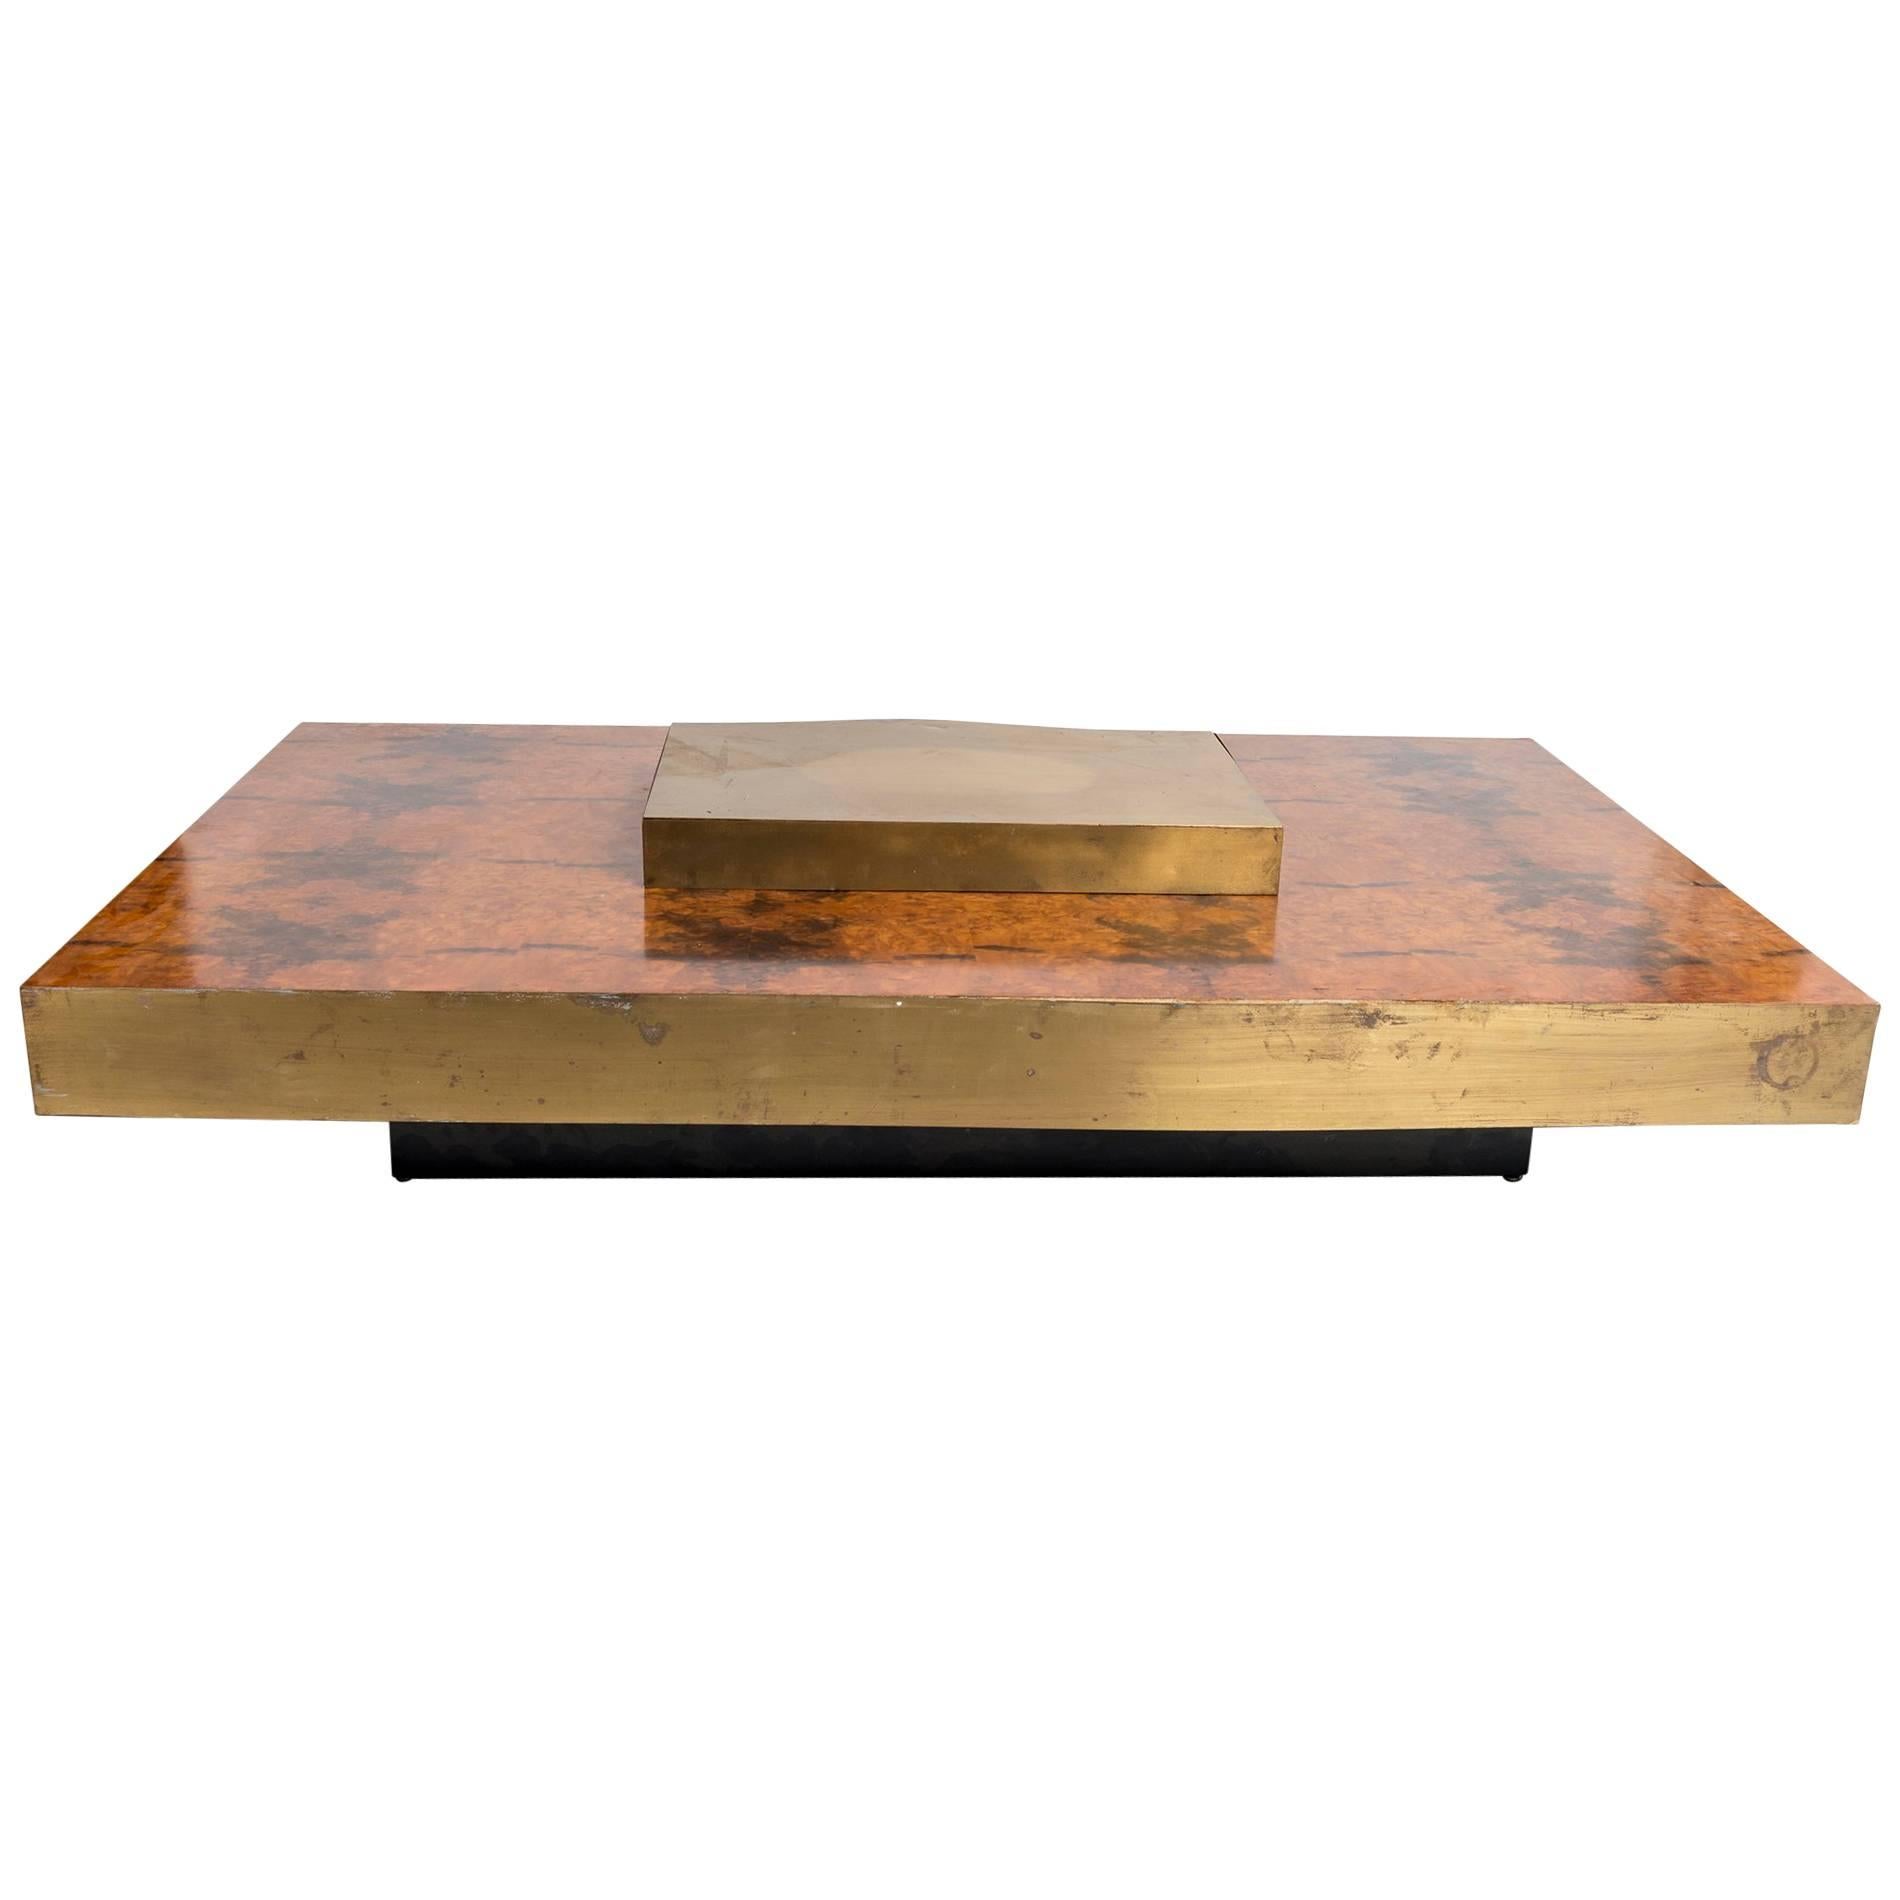 Rectangular Low Brass Center Wooden Coffee Table with Brass Trim